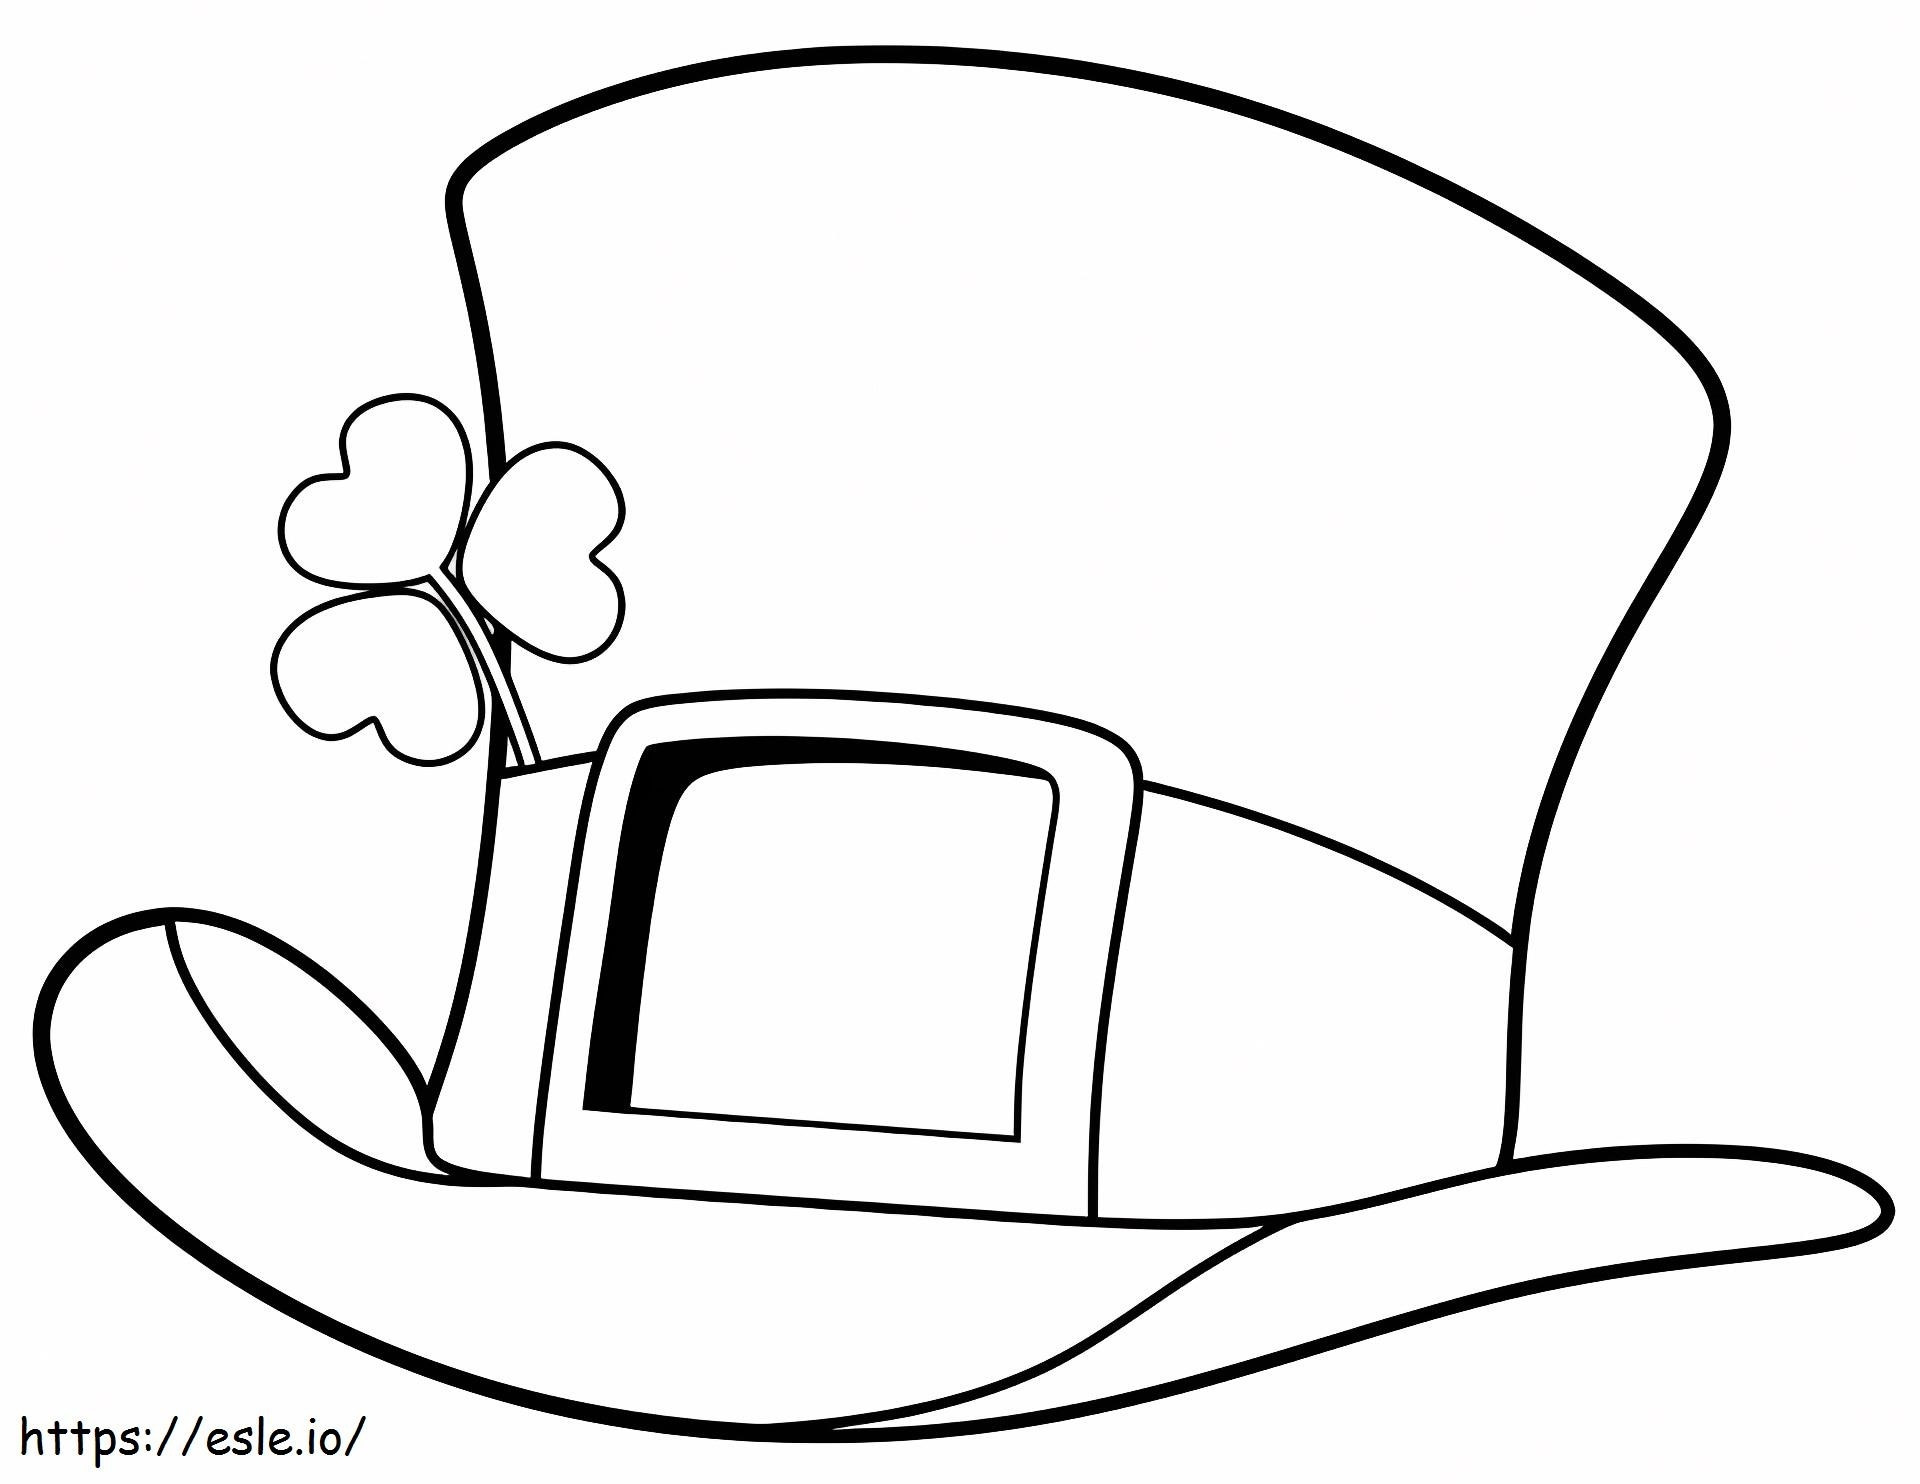 1526981136 St Patrick Day Top Hat coloring page